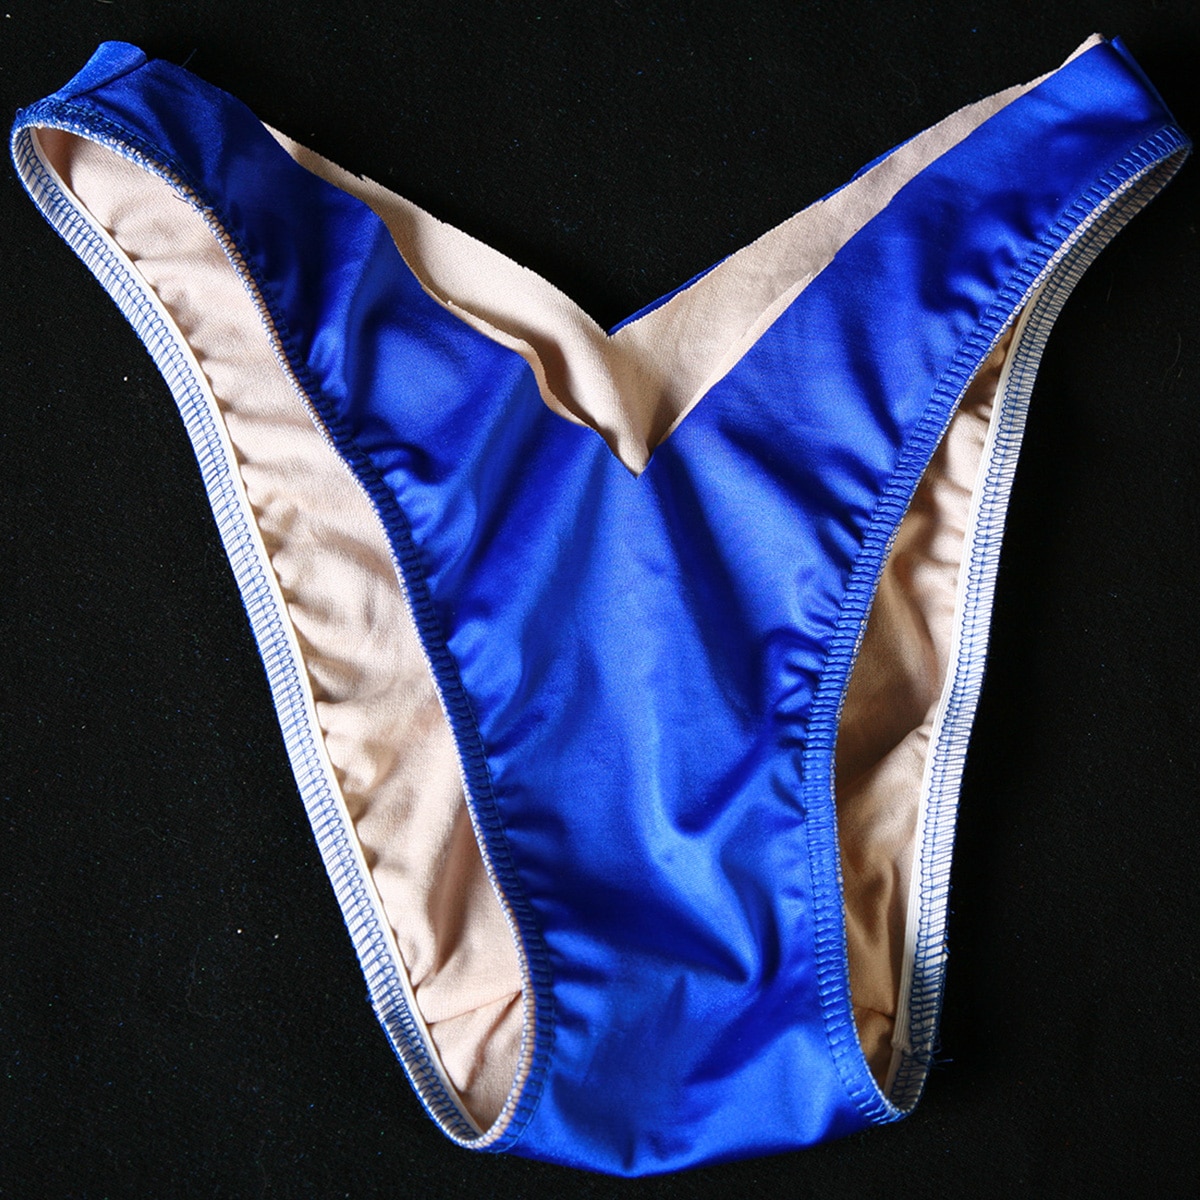 Blue v cut bikini bottoms with elastic applied to the legs.